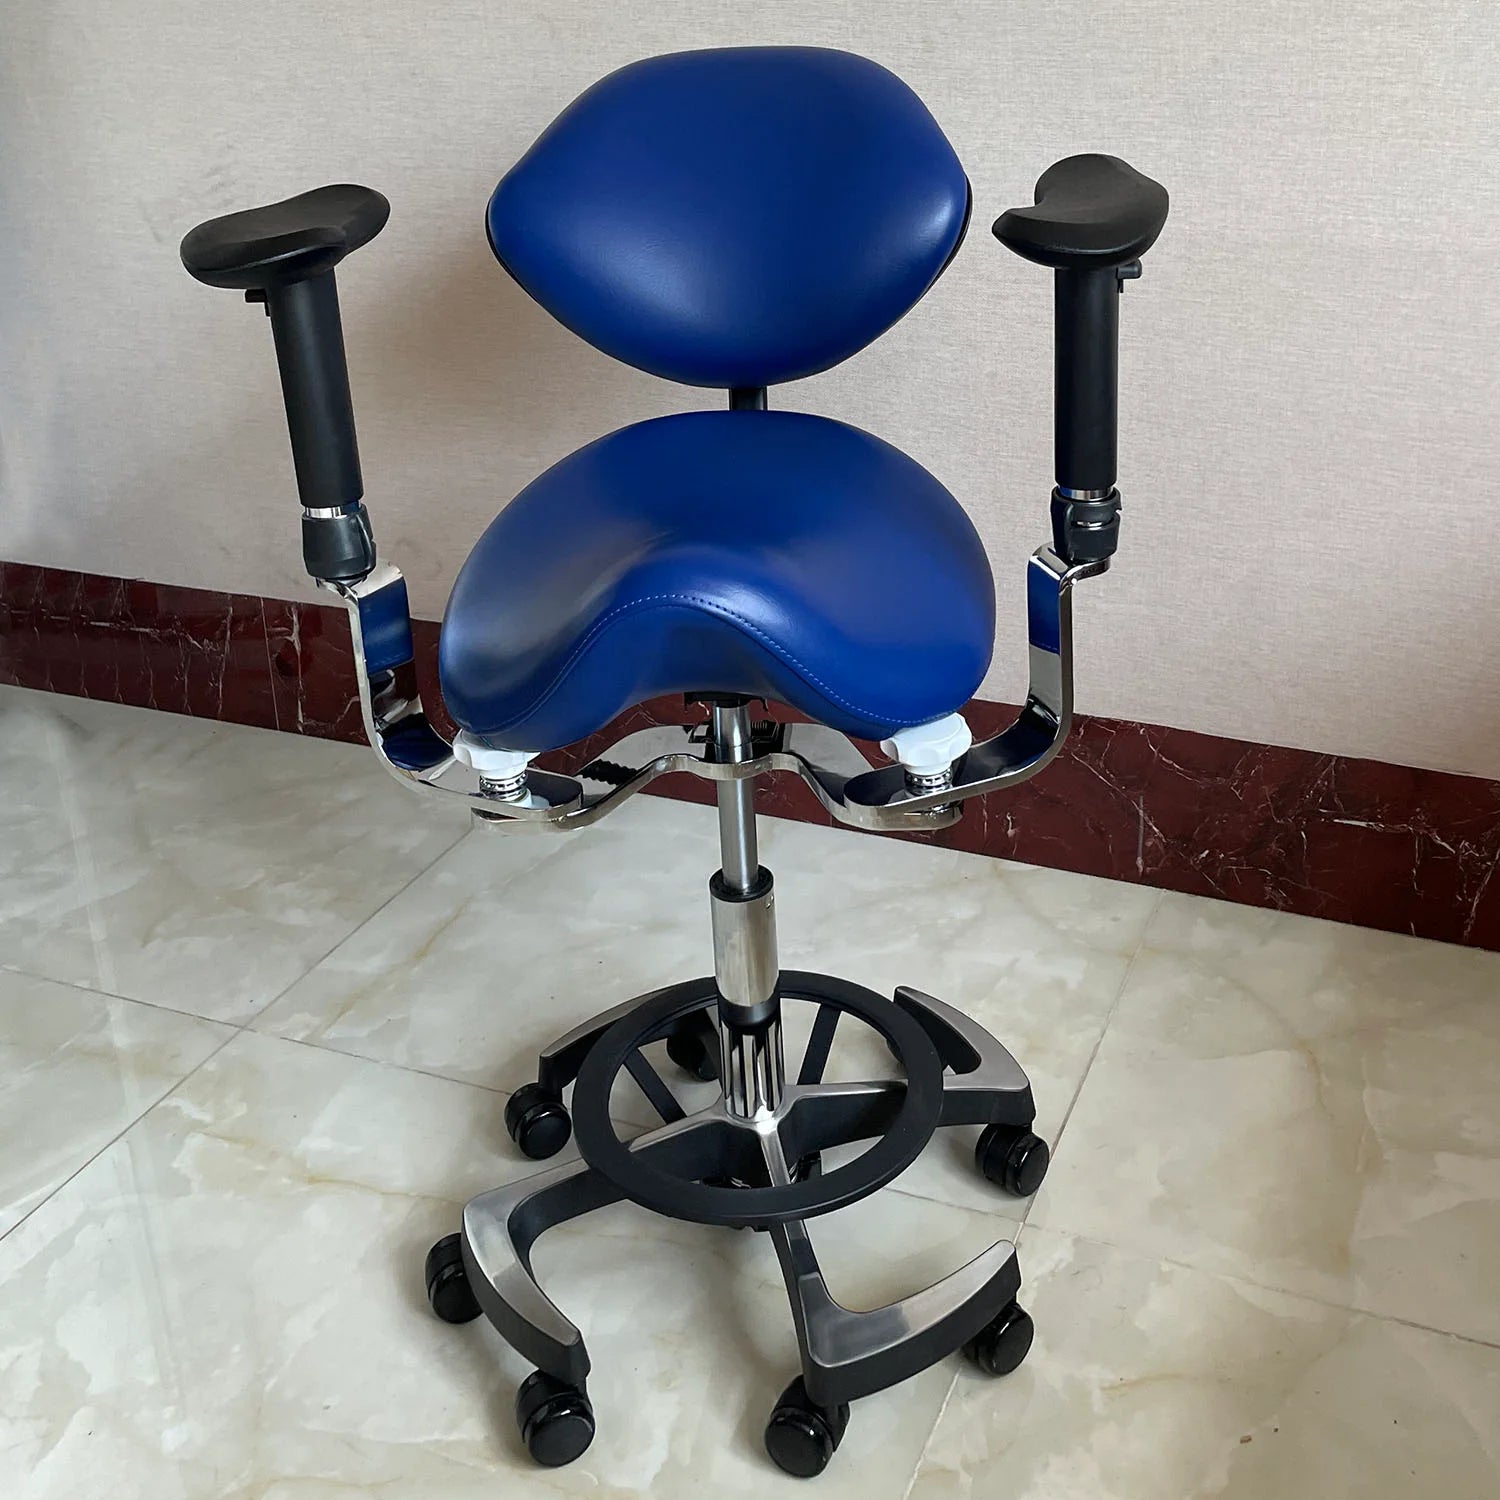 Saddle surgical stool with comfortable back-rest